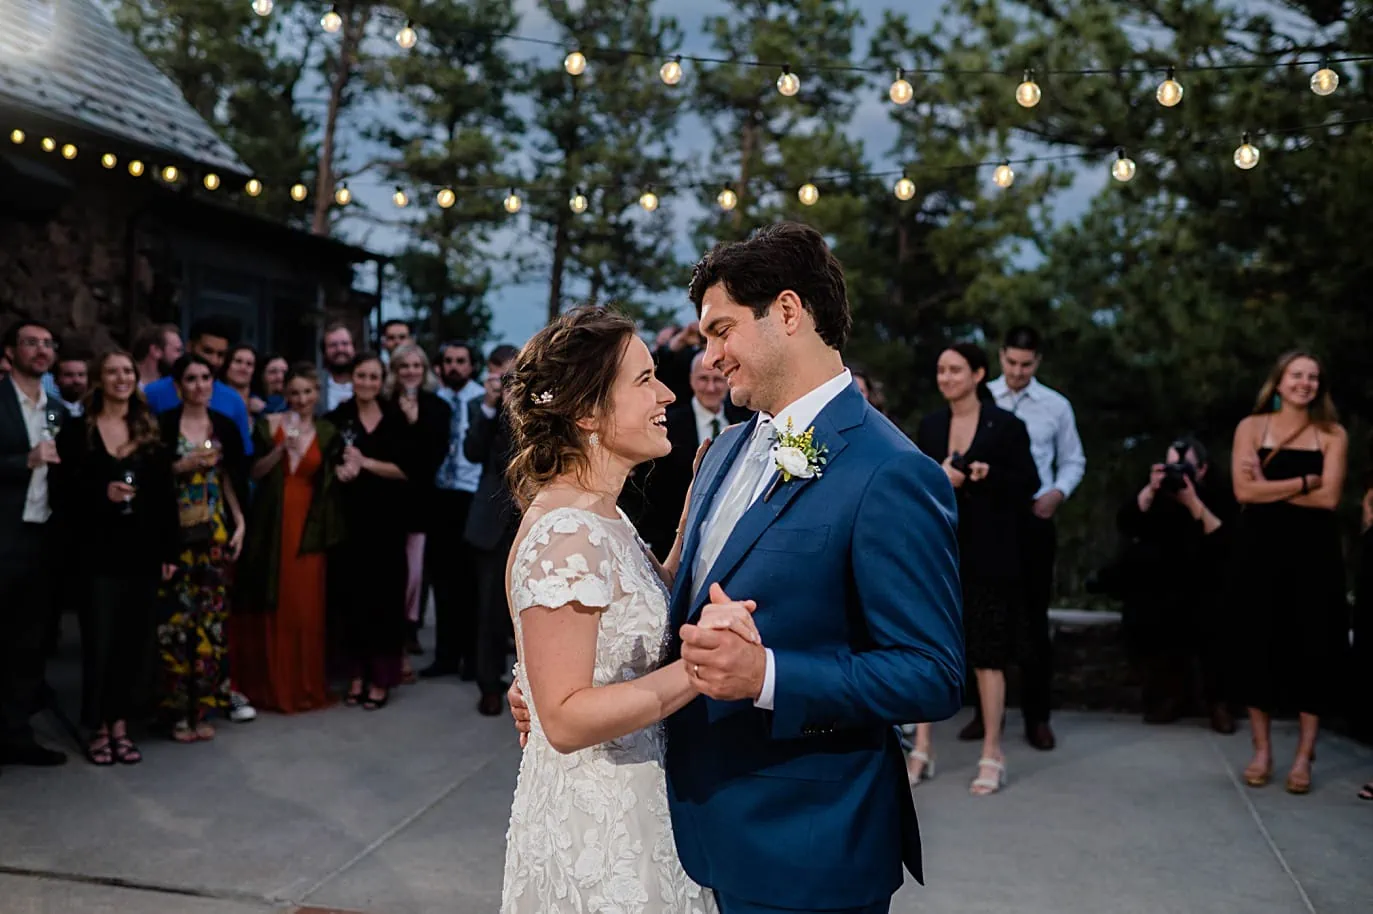 Bride and groom first dance under the market lights on the patio at their Boettcher Mansion wedding